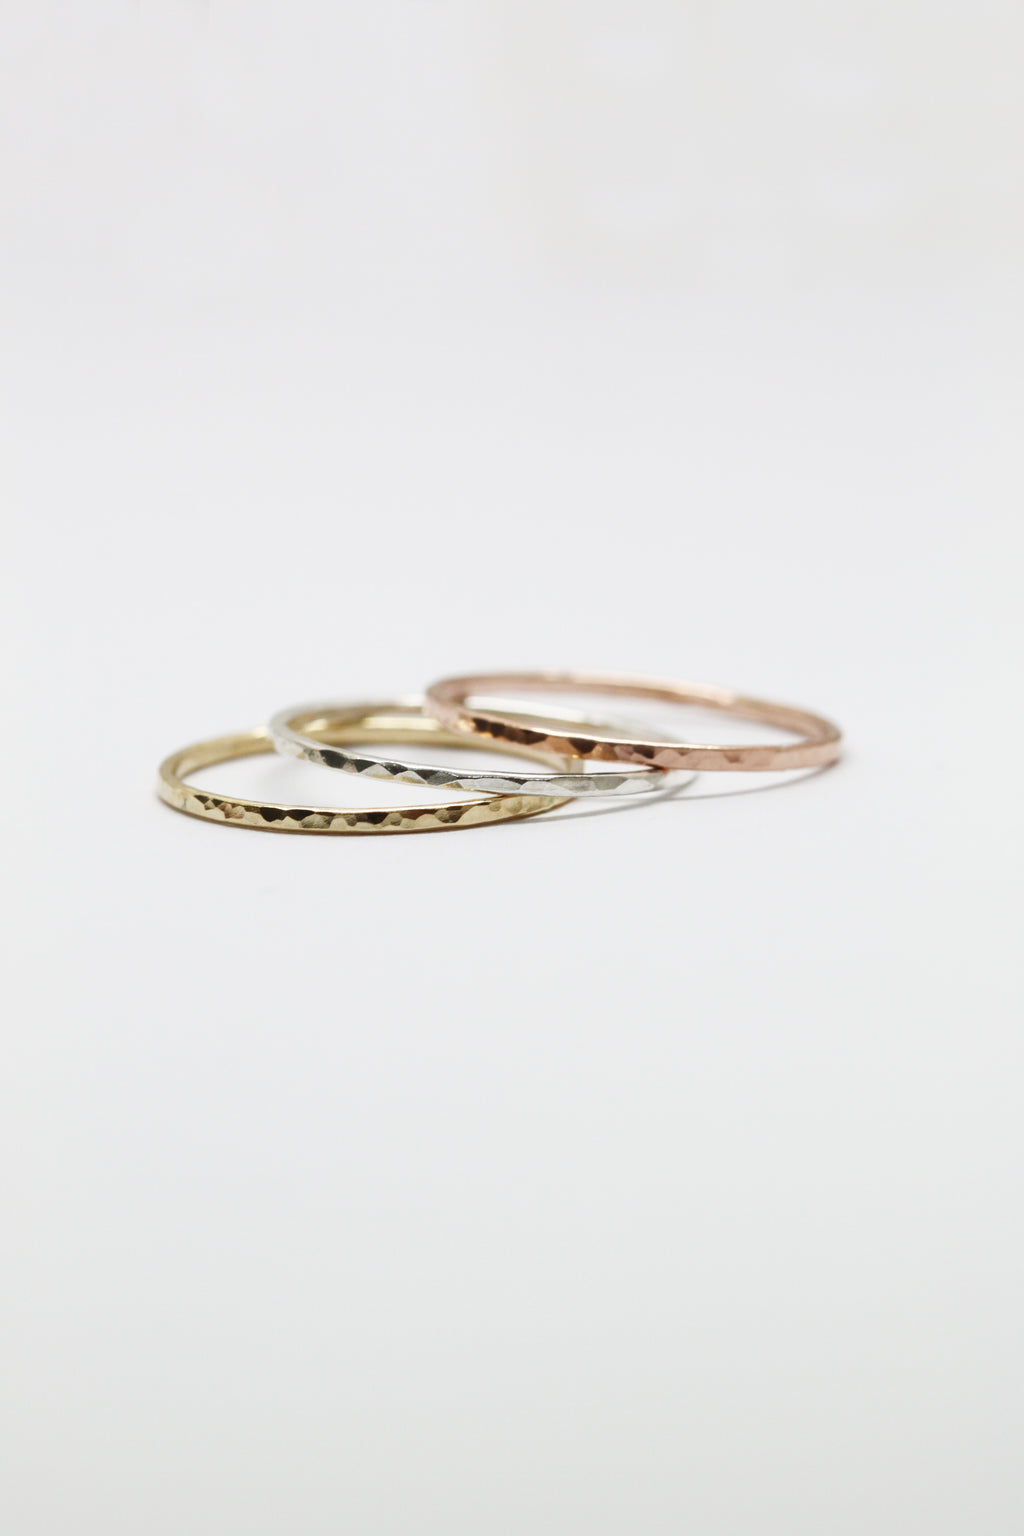 Hammered ring // Yellow gold